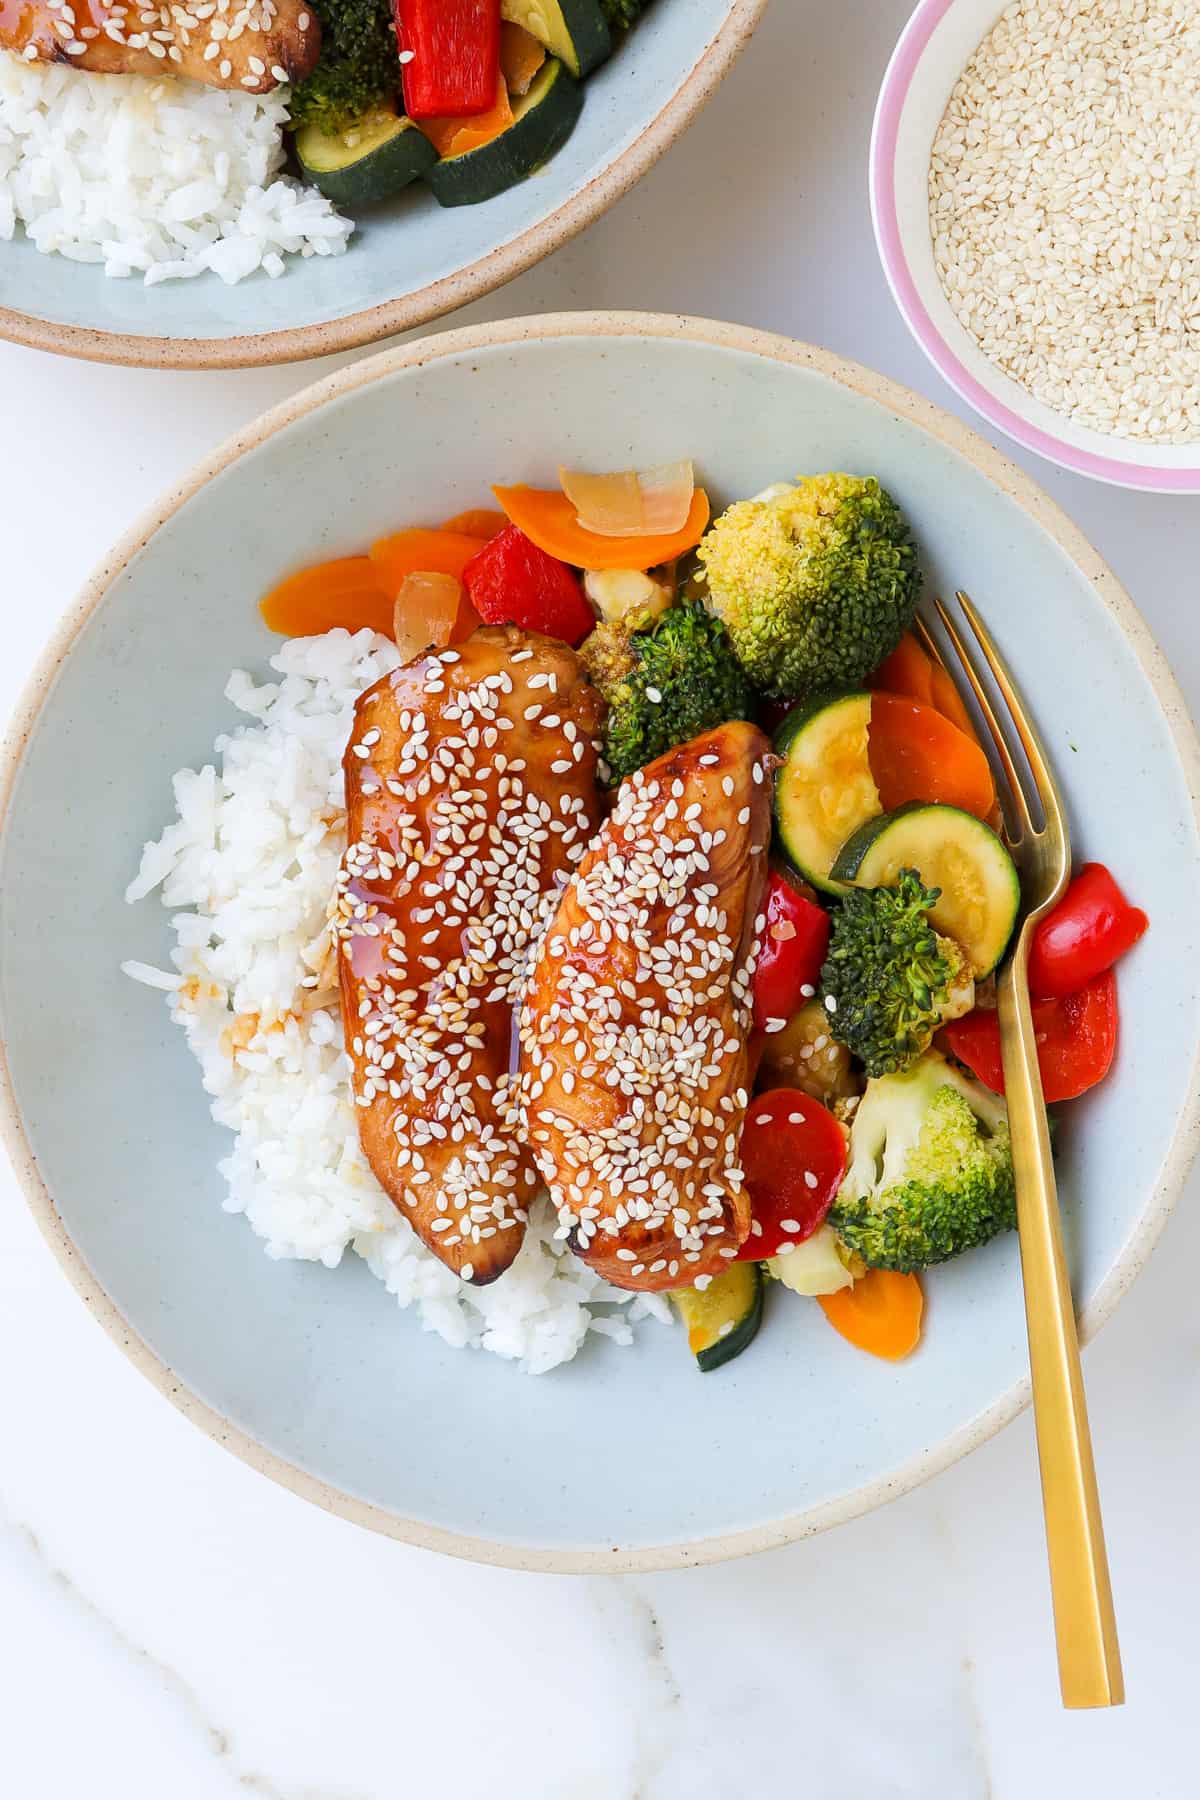 Teriyaki chicken in a bowl with veggies and rice.